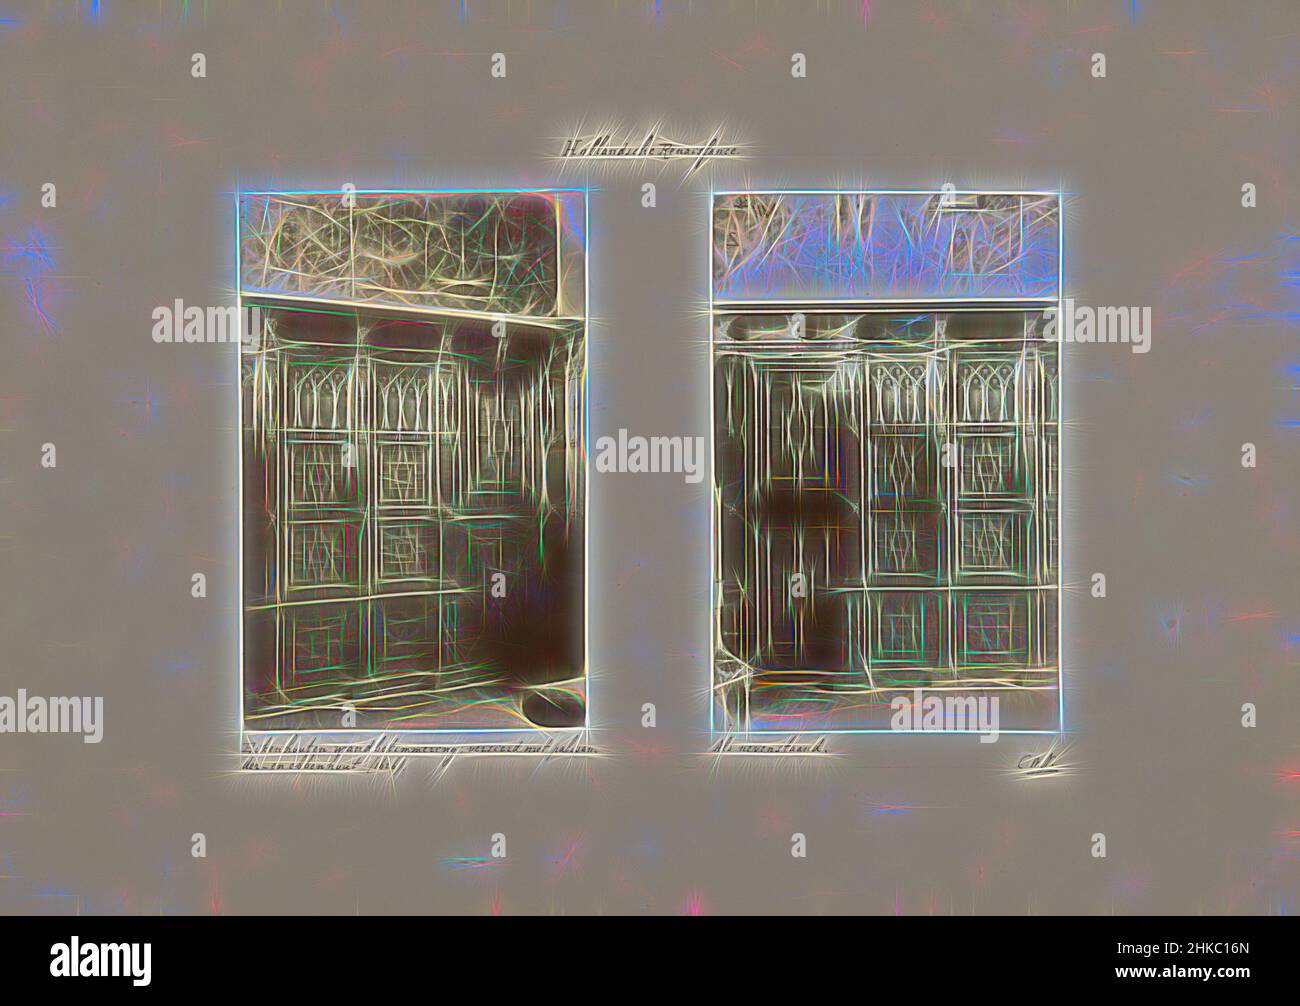 Inspired by View of two views of a wall paneling, On the left the wall paneling, seen from the side, on the right a front view of the wall paneling., Netherlands, c. 1875 - c. 1900, height 315 mm × width 446 mm, Reimagined by Artotop. Classic art reinvented with a modern twist. Design of warm cheerful glowing of brightness and light ray radiance. Photography inspired by surrealism and futurism, embracing dynamic energy of modern technology, movement, speed and revolutionize culture Stock Photo